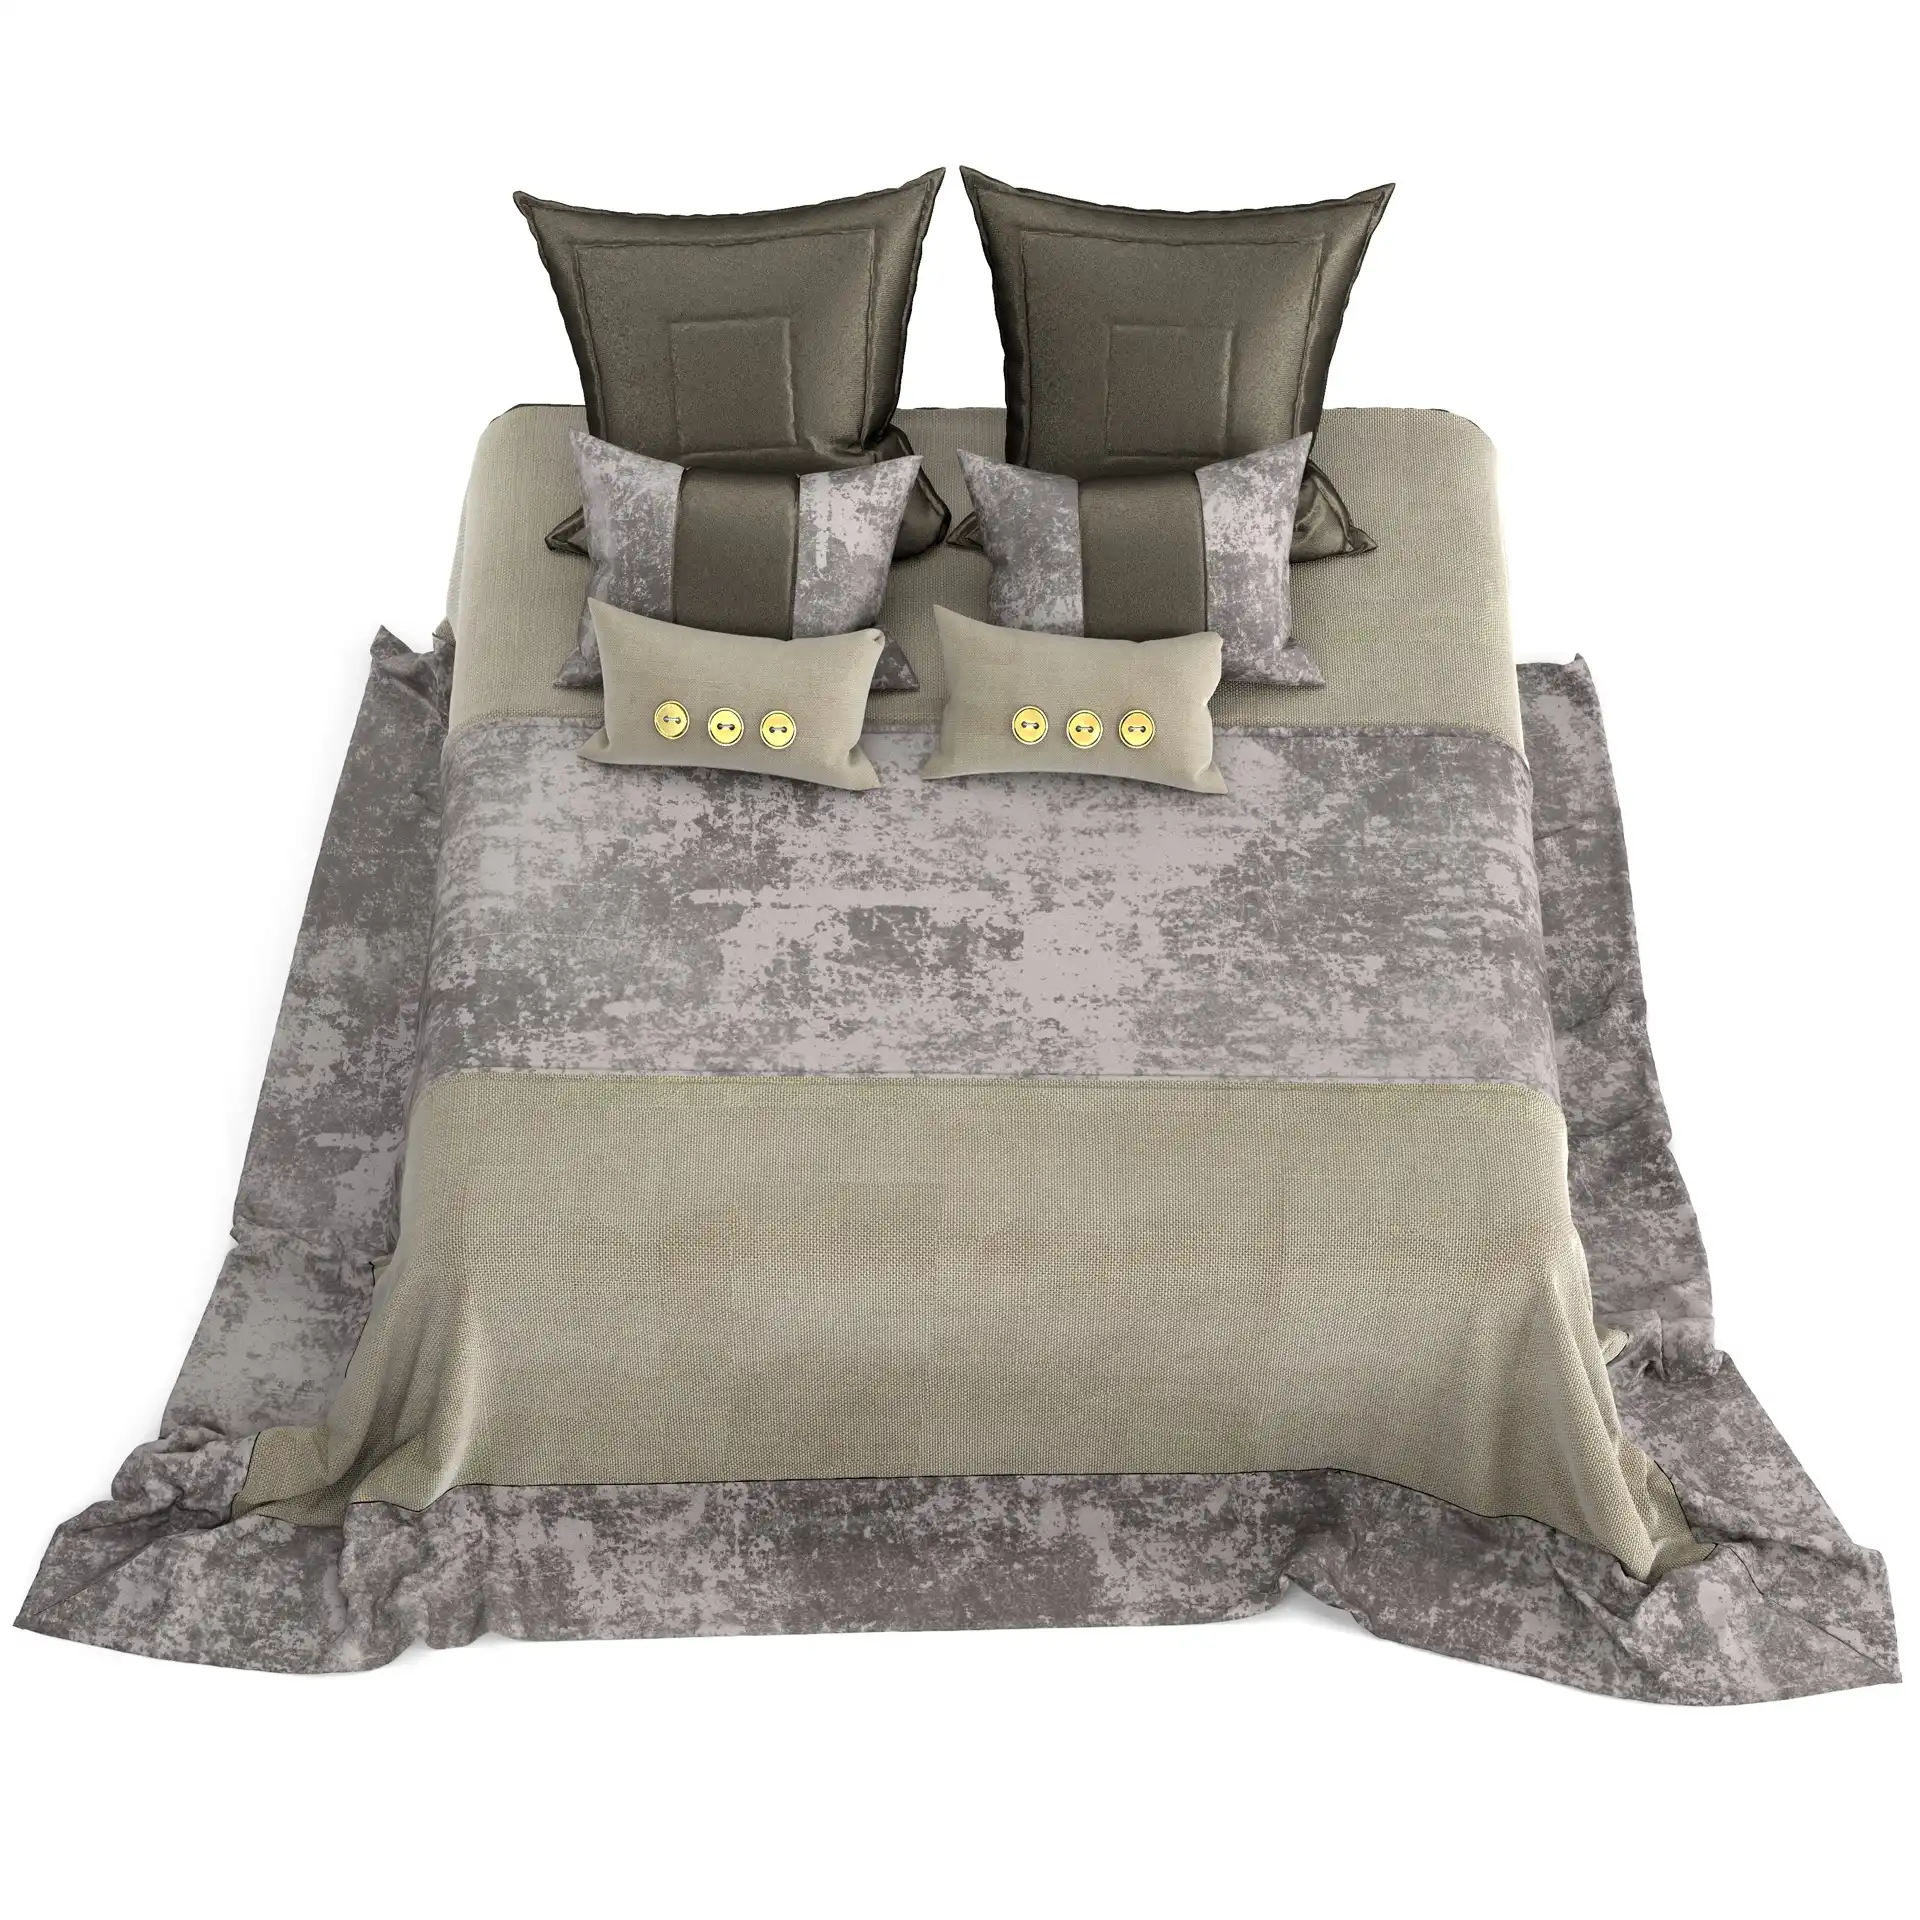 Free 3d model of luxury bed. The bed set contains from one bedspread 3D model and six 3d models of pillows. The pillows set comes in different colors and sizes. The 3d models of two pillows comes with three golden buttons each.